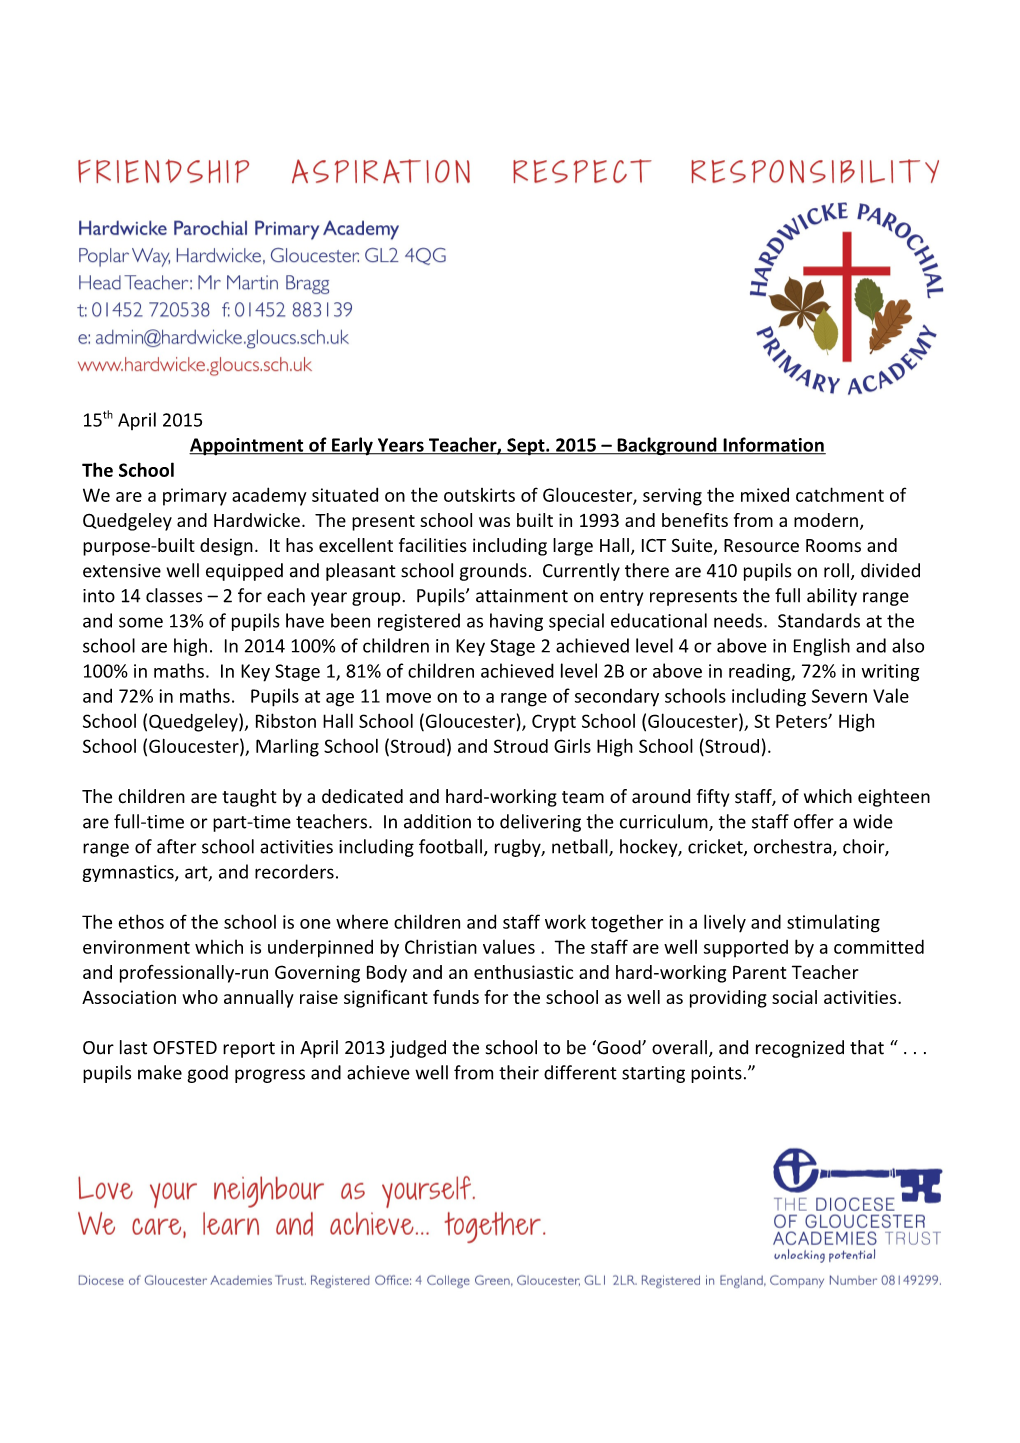 Appointment of Early Years Teacher, Sept. 2015 Background Information